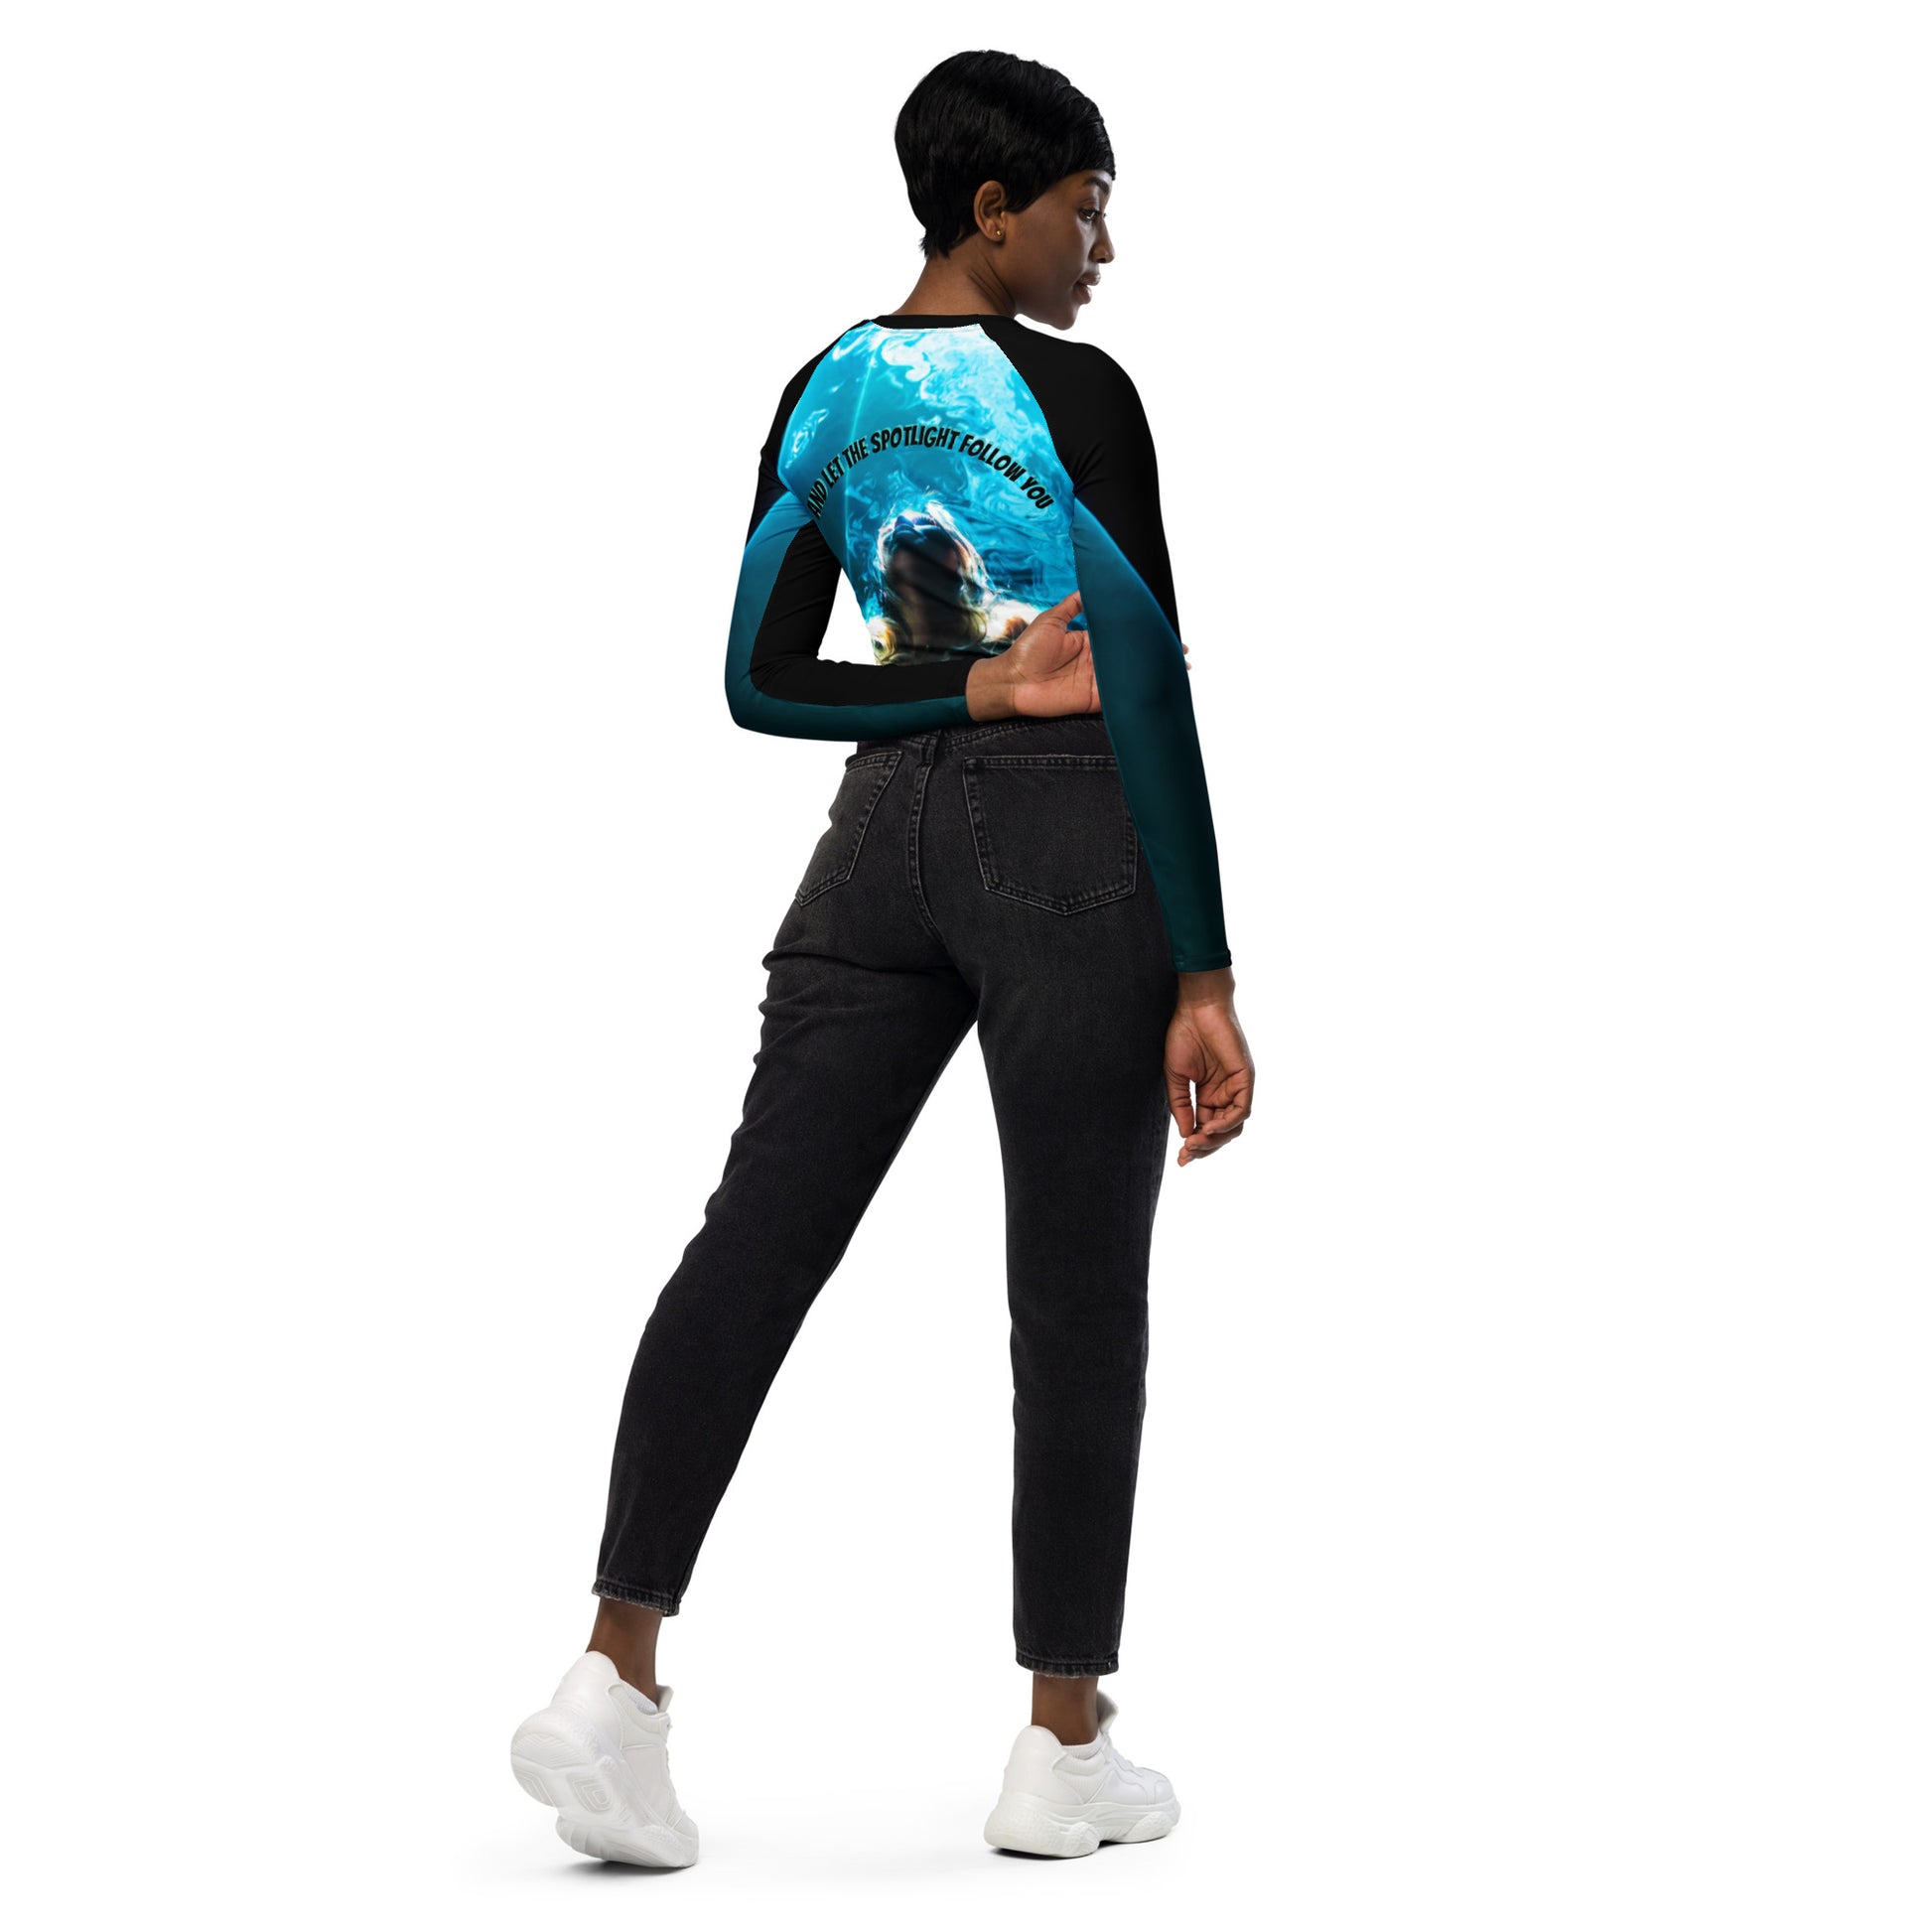 See yourself in the Spotlight in these LBS Aqua Long-Sleeve Crop Top for the Female Artist.